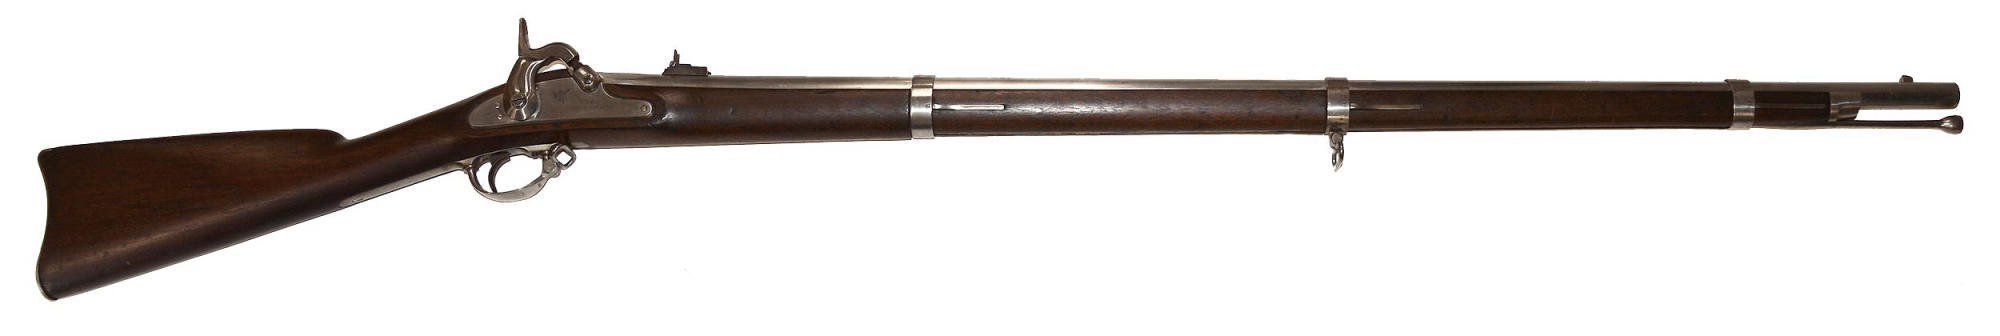 VERY NICE MODEL 1861 SPRINGFIELD DATED 1862, EARLY PRODUCTION WITH RACK NUMBERS